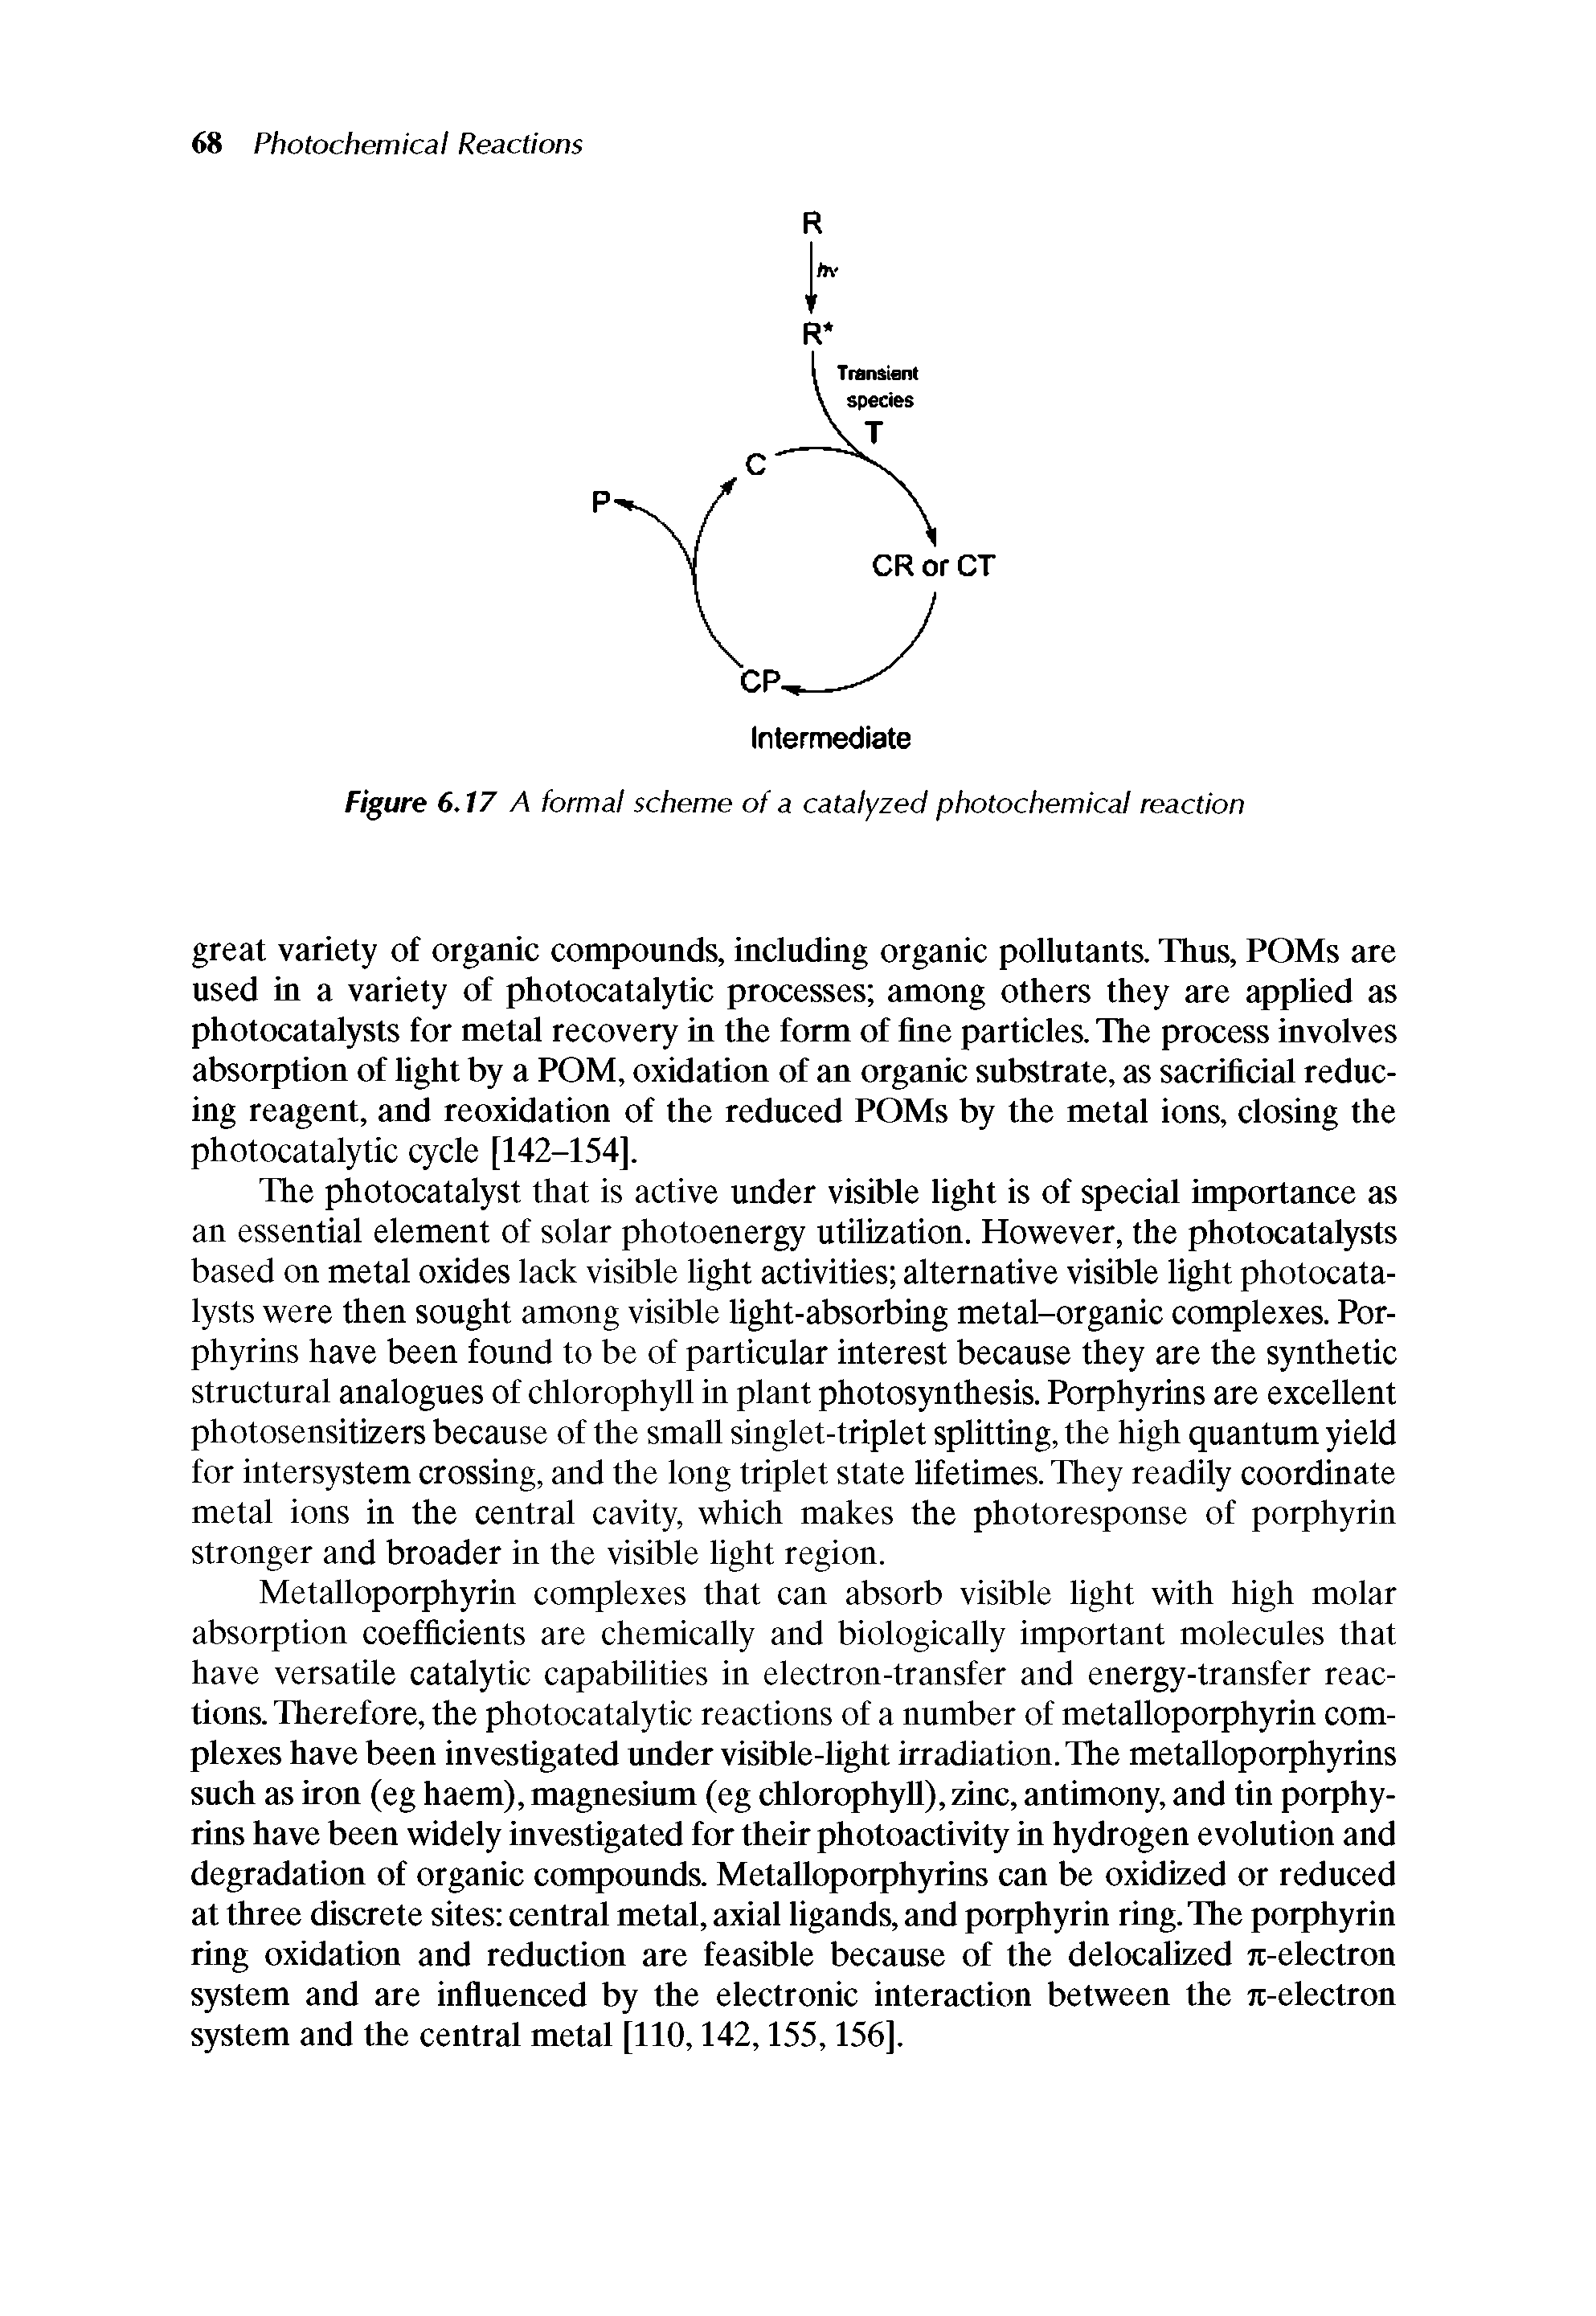 Figure 6.17 A formal scheme of a catalyzed photochemical reaction...